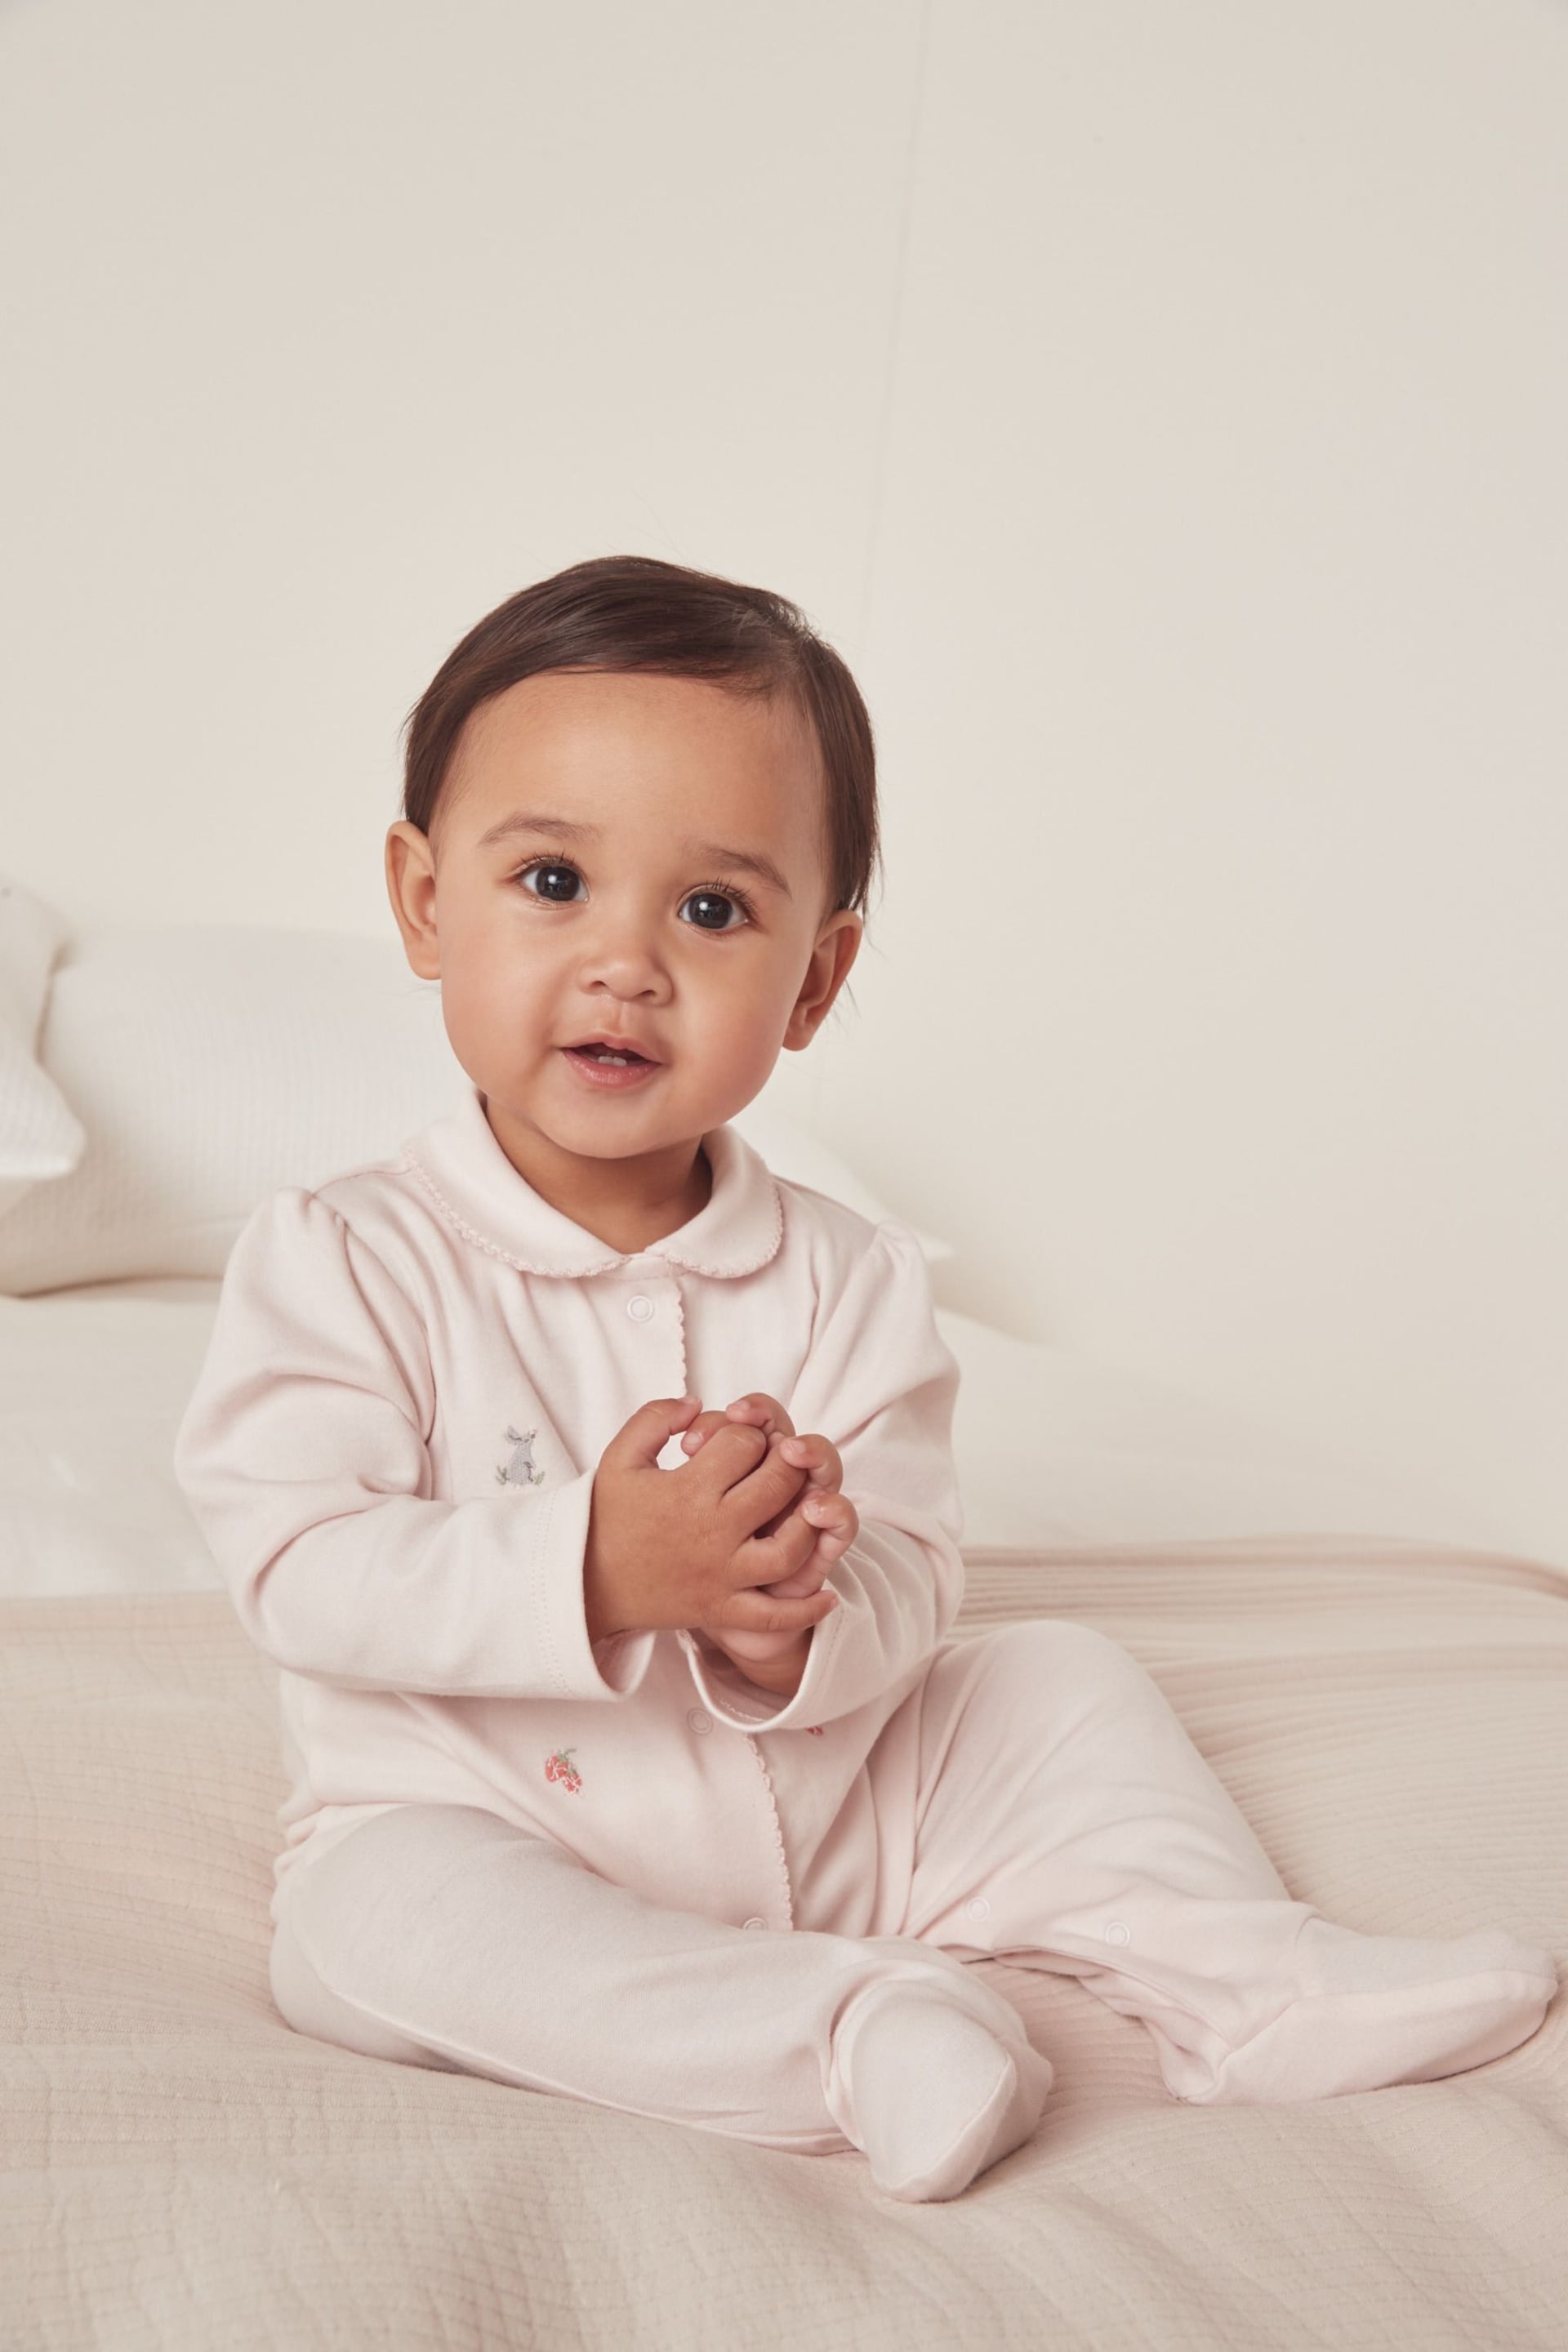 The White Company Pink Organic Cotton Hoppy Bunny Embroidered Collared Sleepsuit - Image 1 of 4